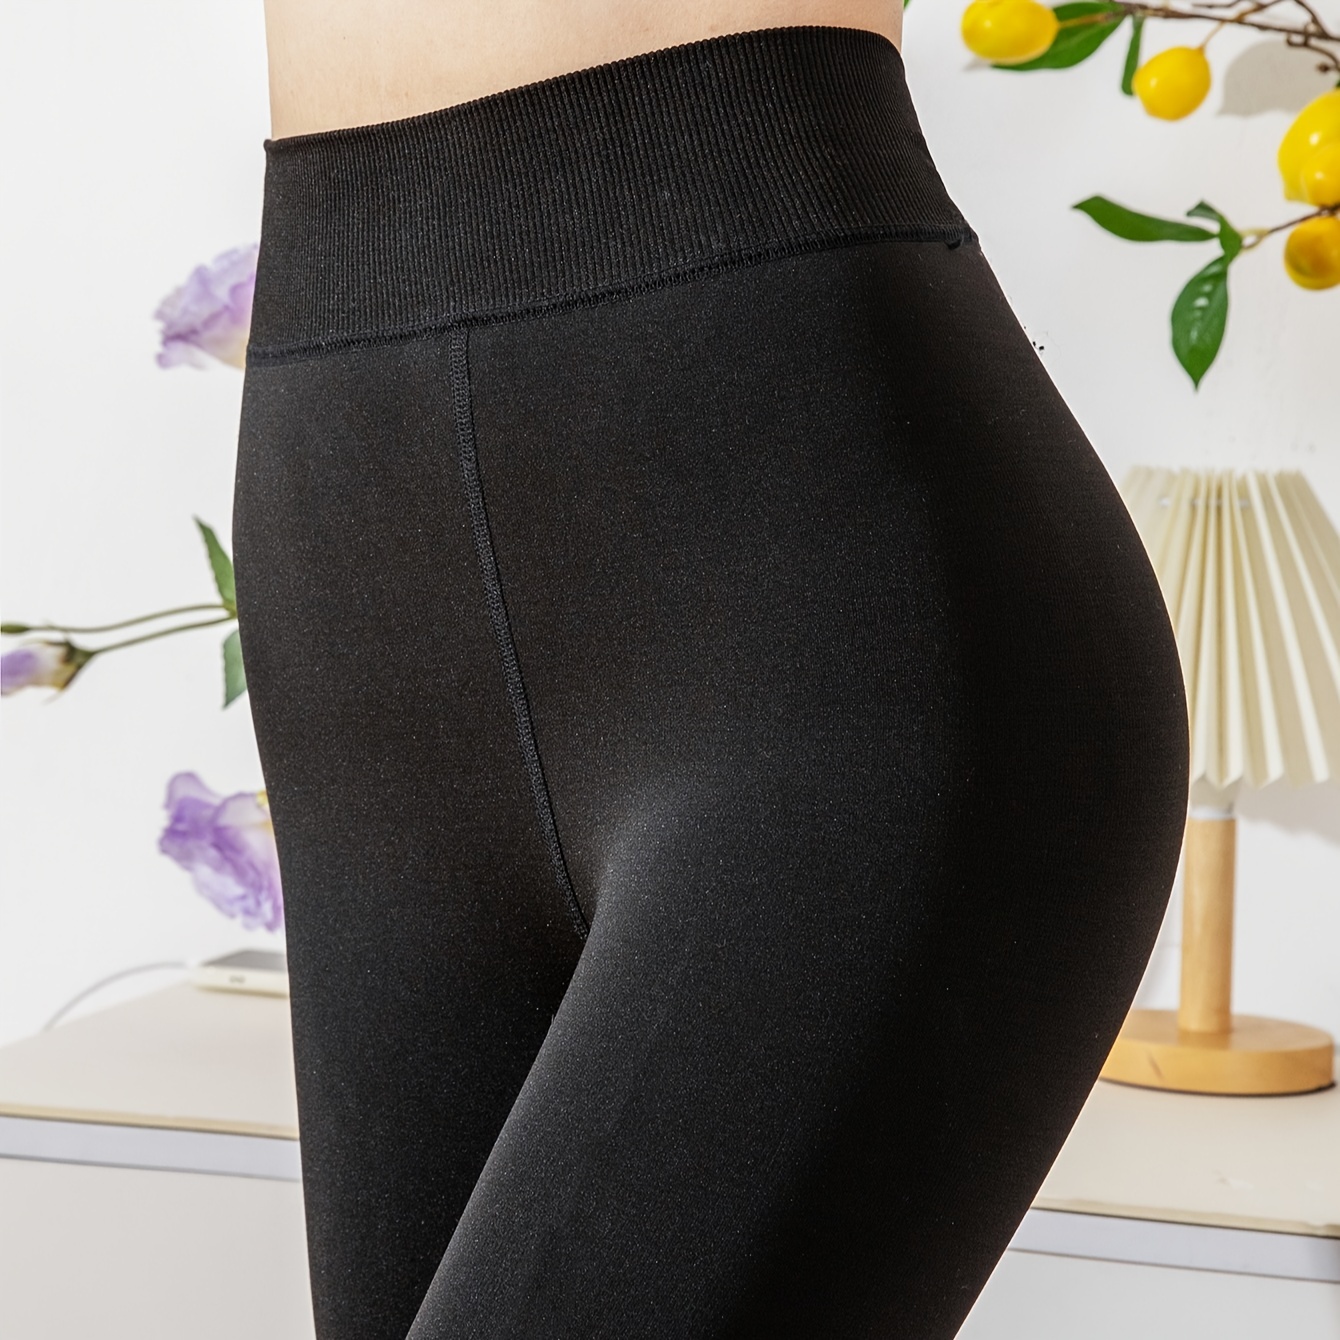 Pants Clearance Women'S Large Size Leggings Thermal Pantyhose Tights High  Elastic Opaque Tights, Winter Warm Elastic Pants Fleece Lined Thick Black